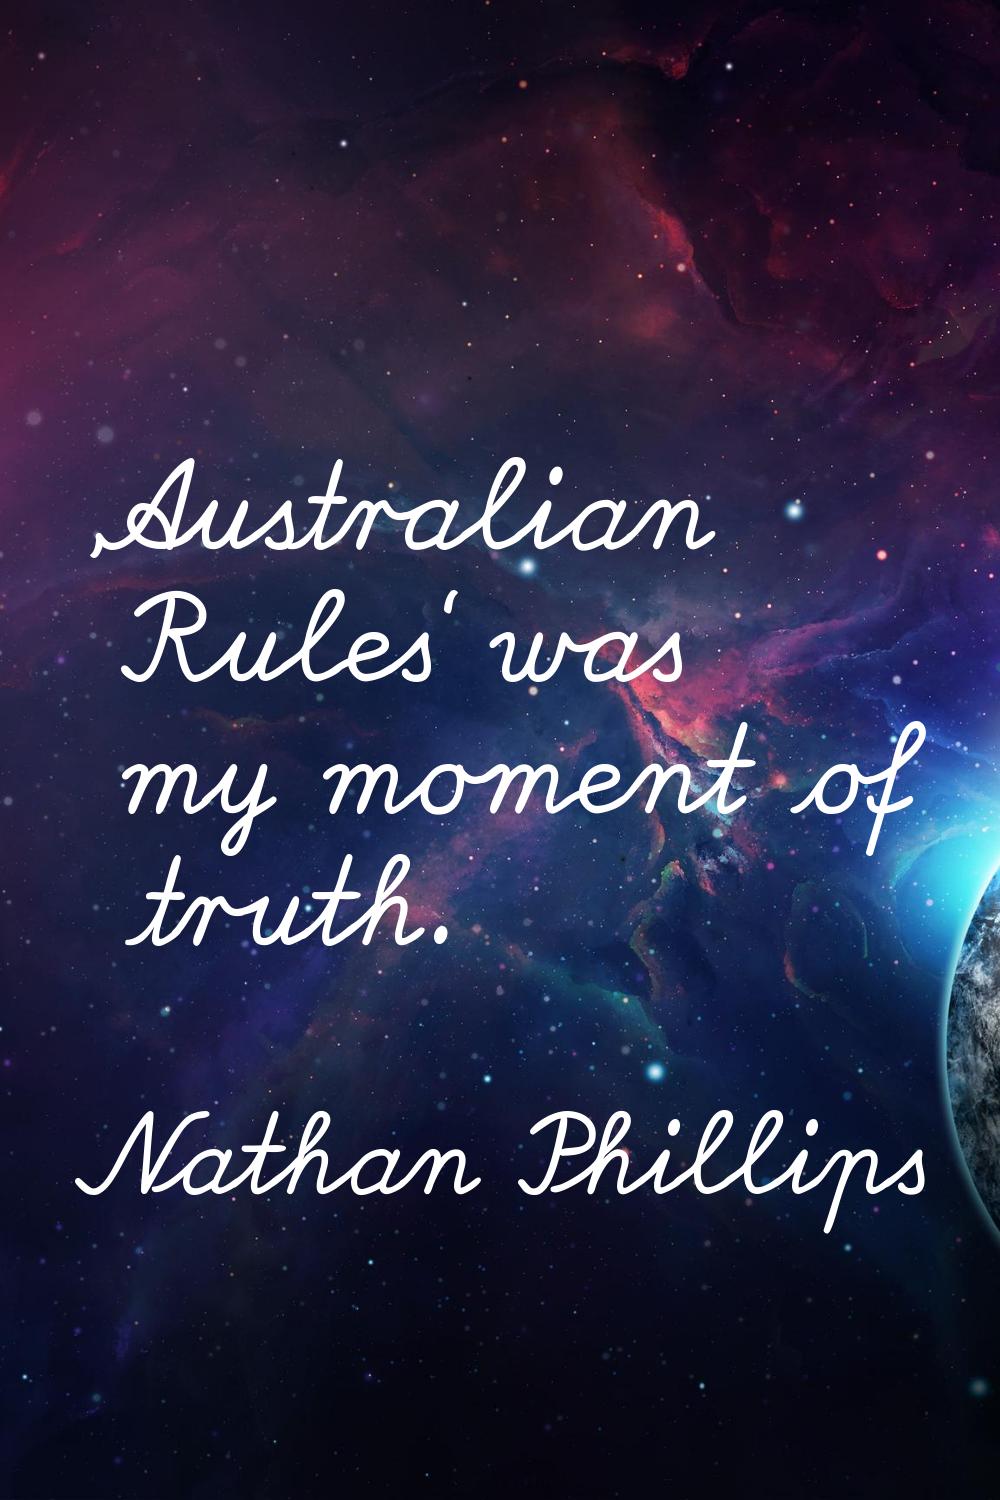 'Australian Rules' was my moment of truth.